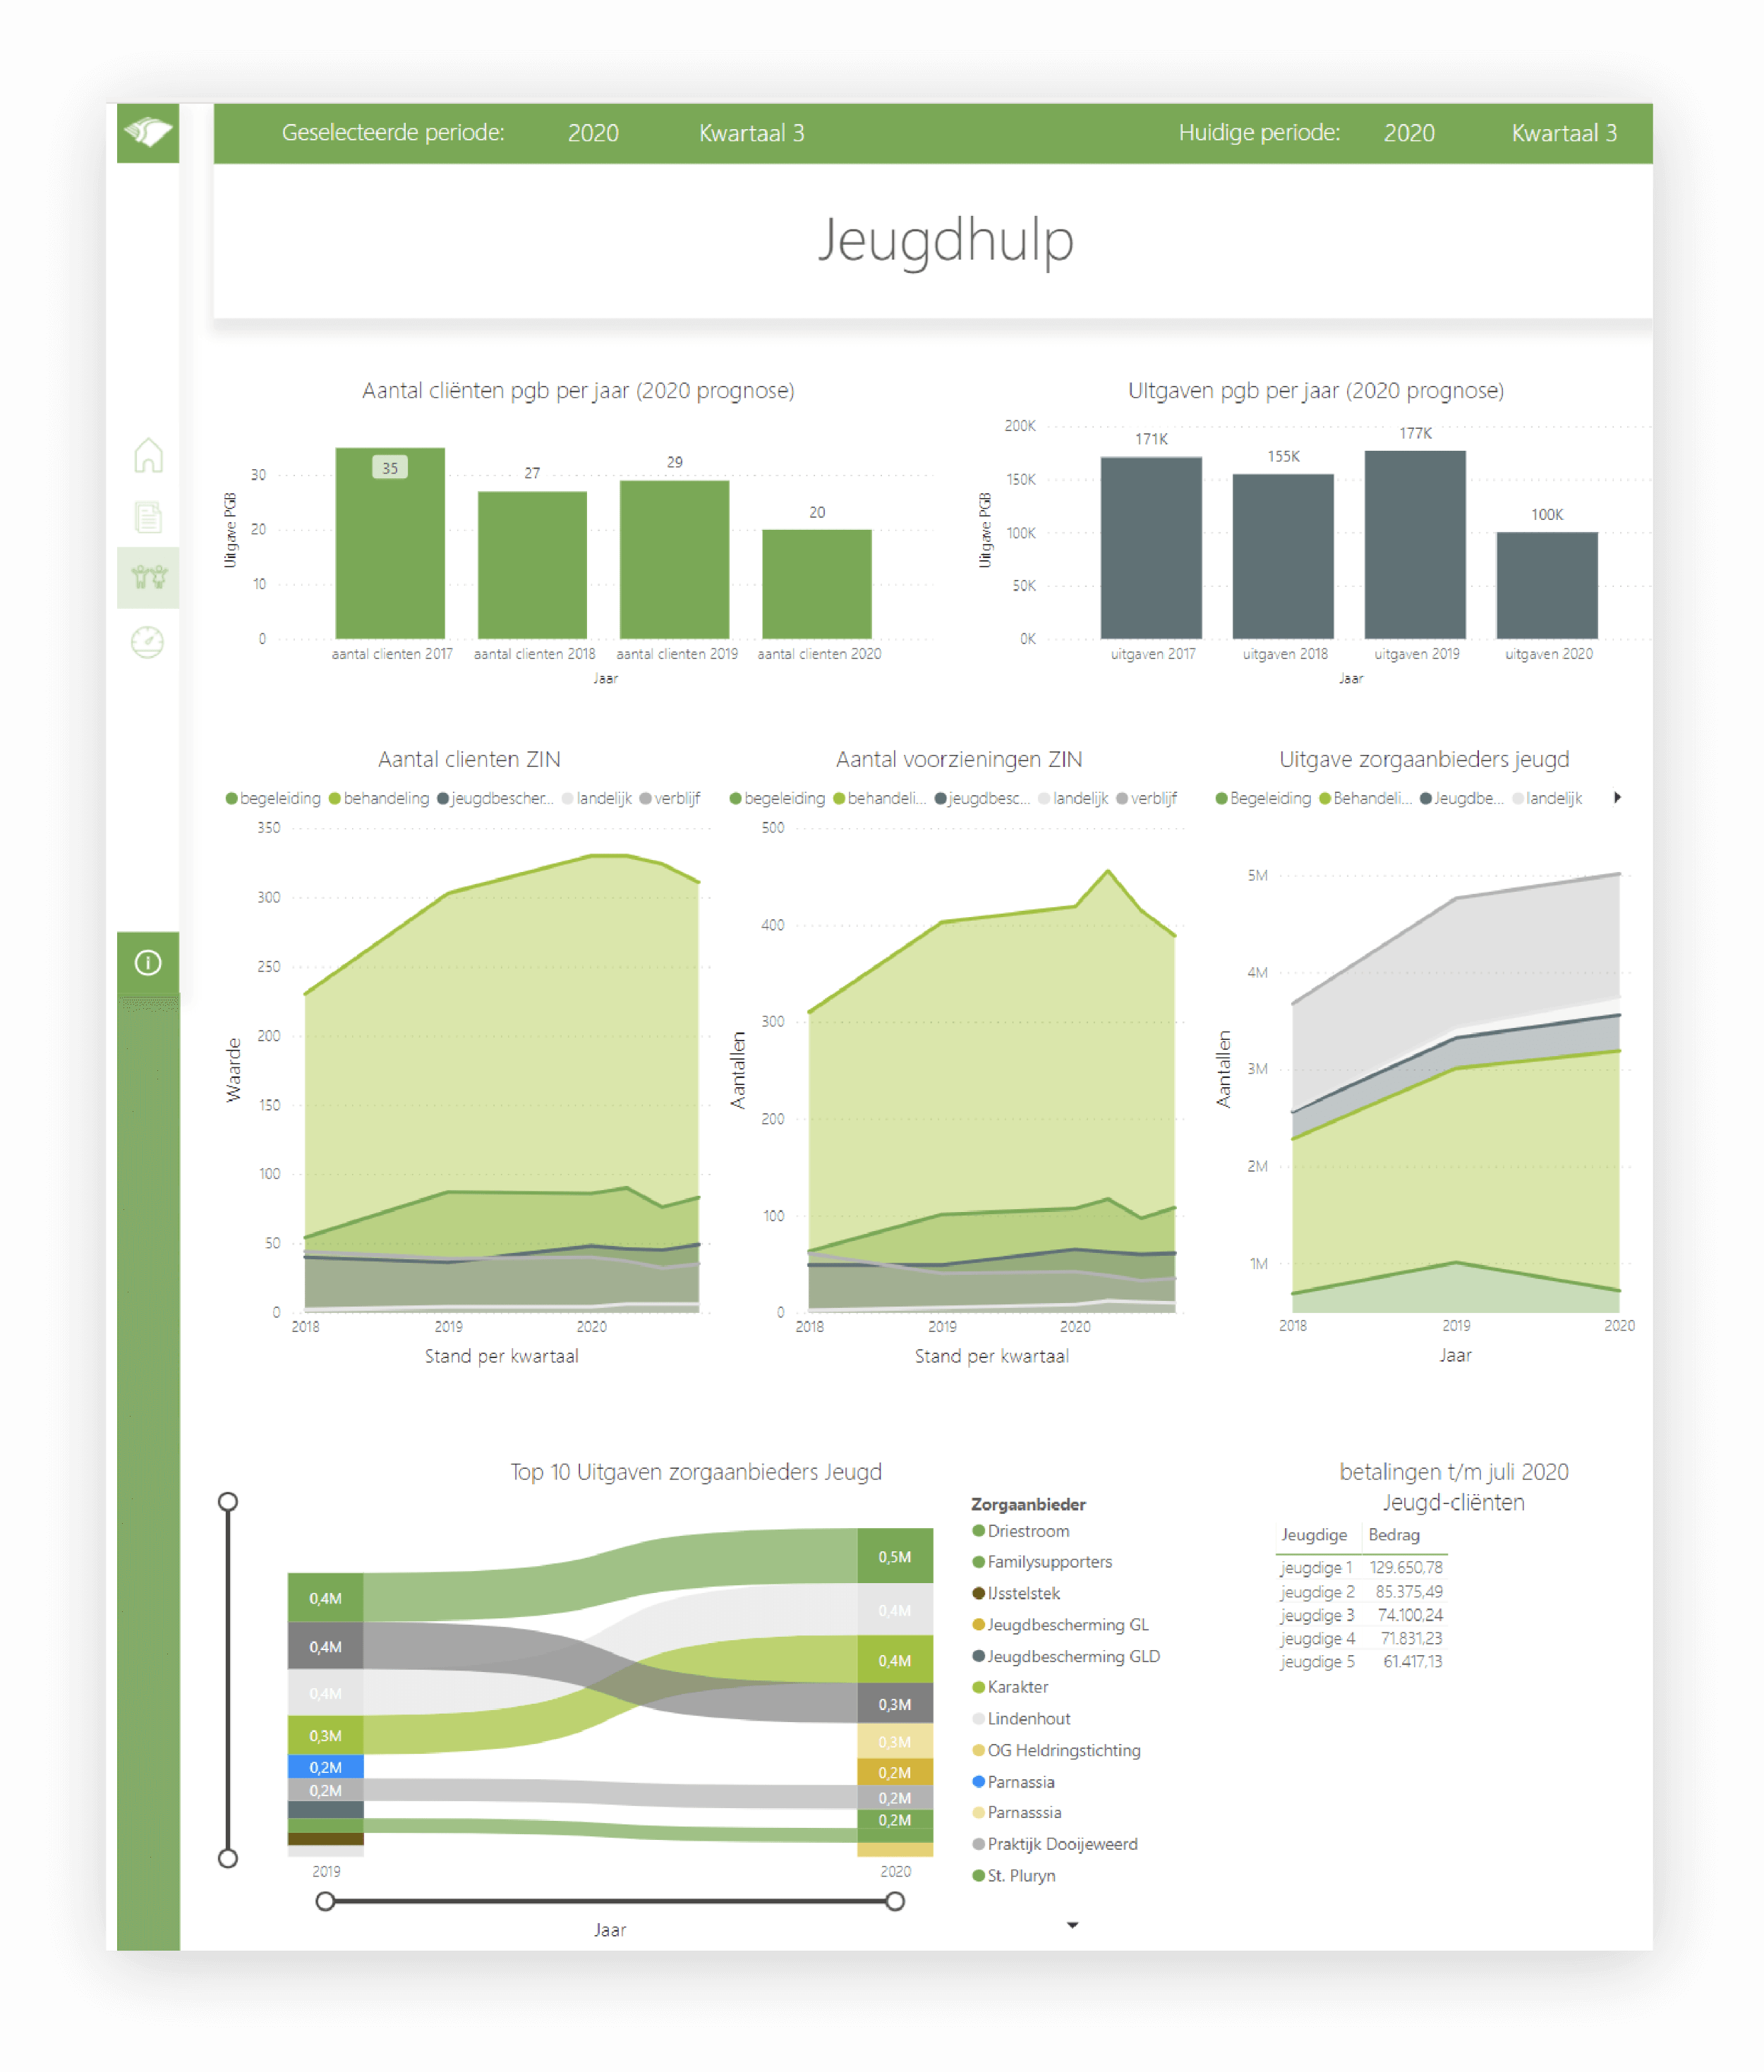 Example of a BI dashboard from a municipality that provides youth services